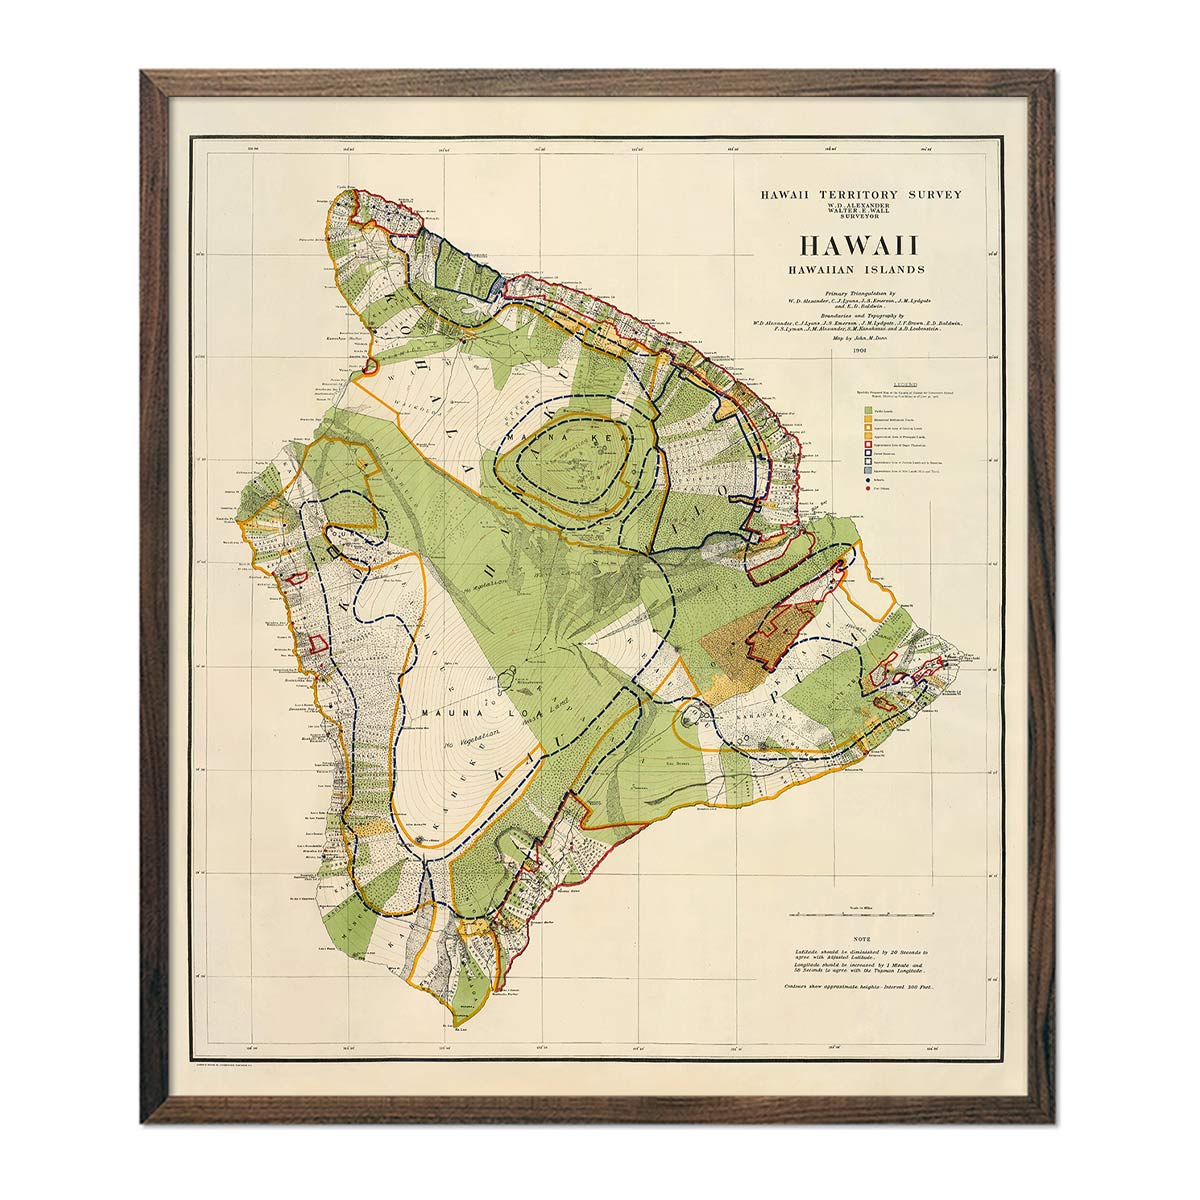 Vintage map of Hawaii from 1901